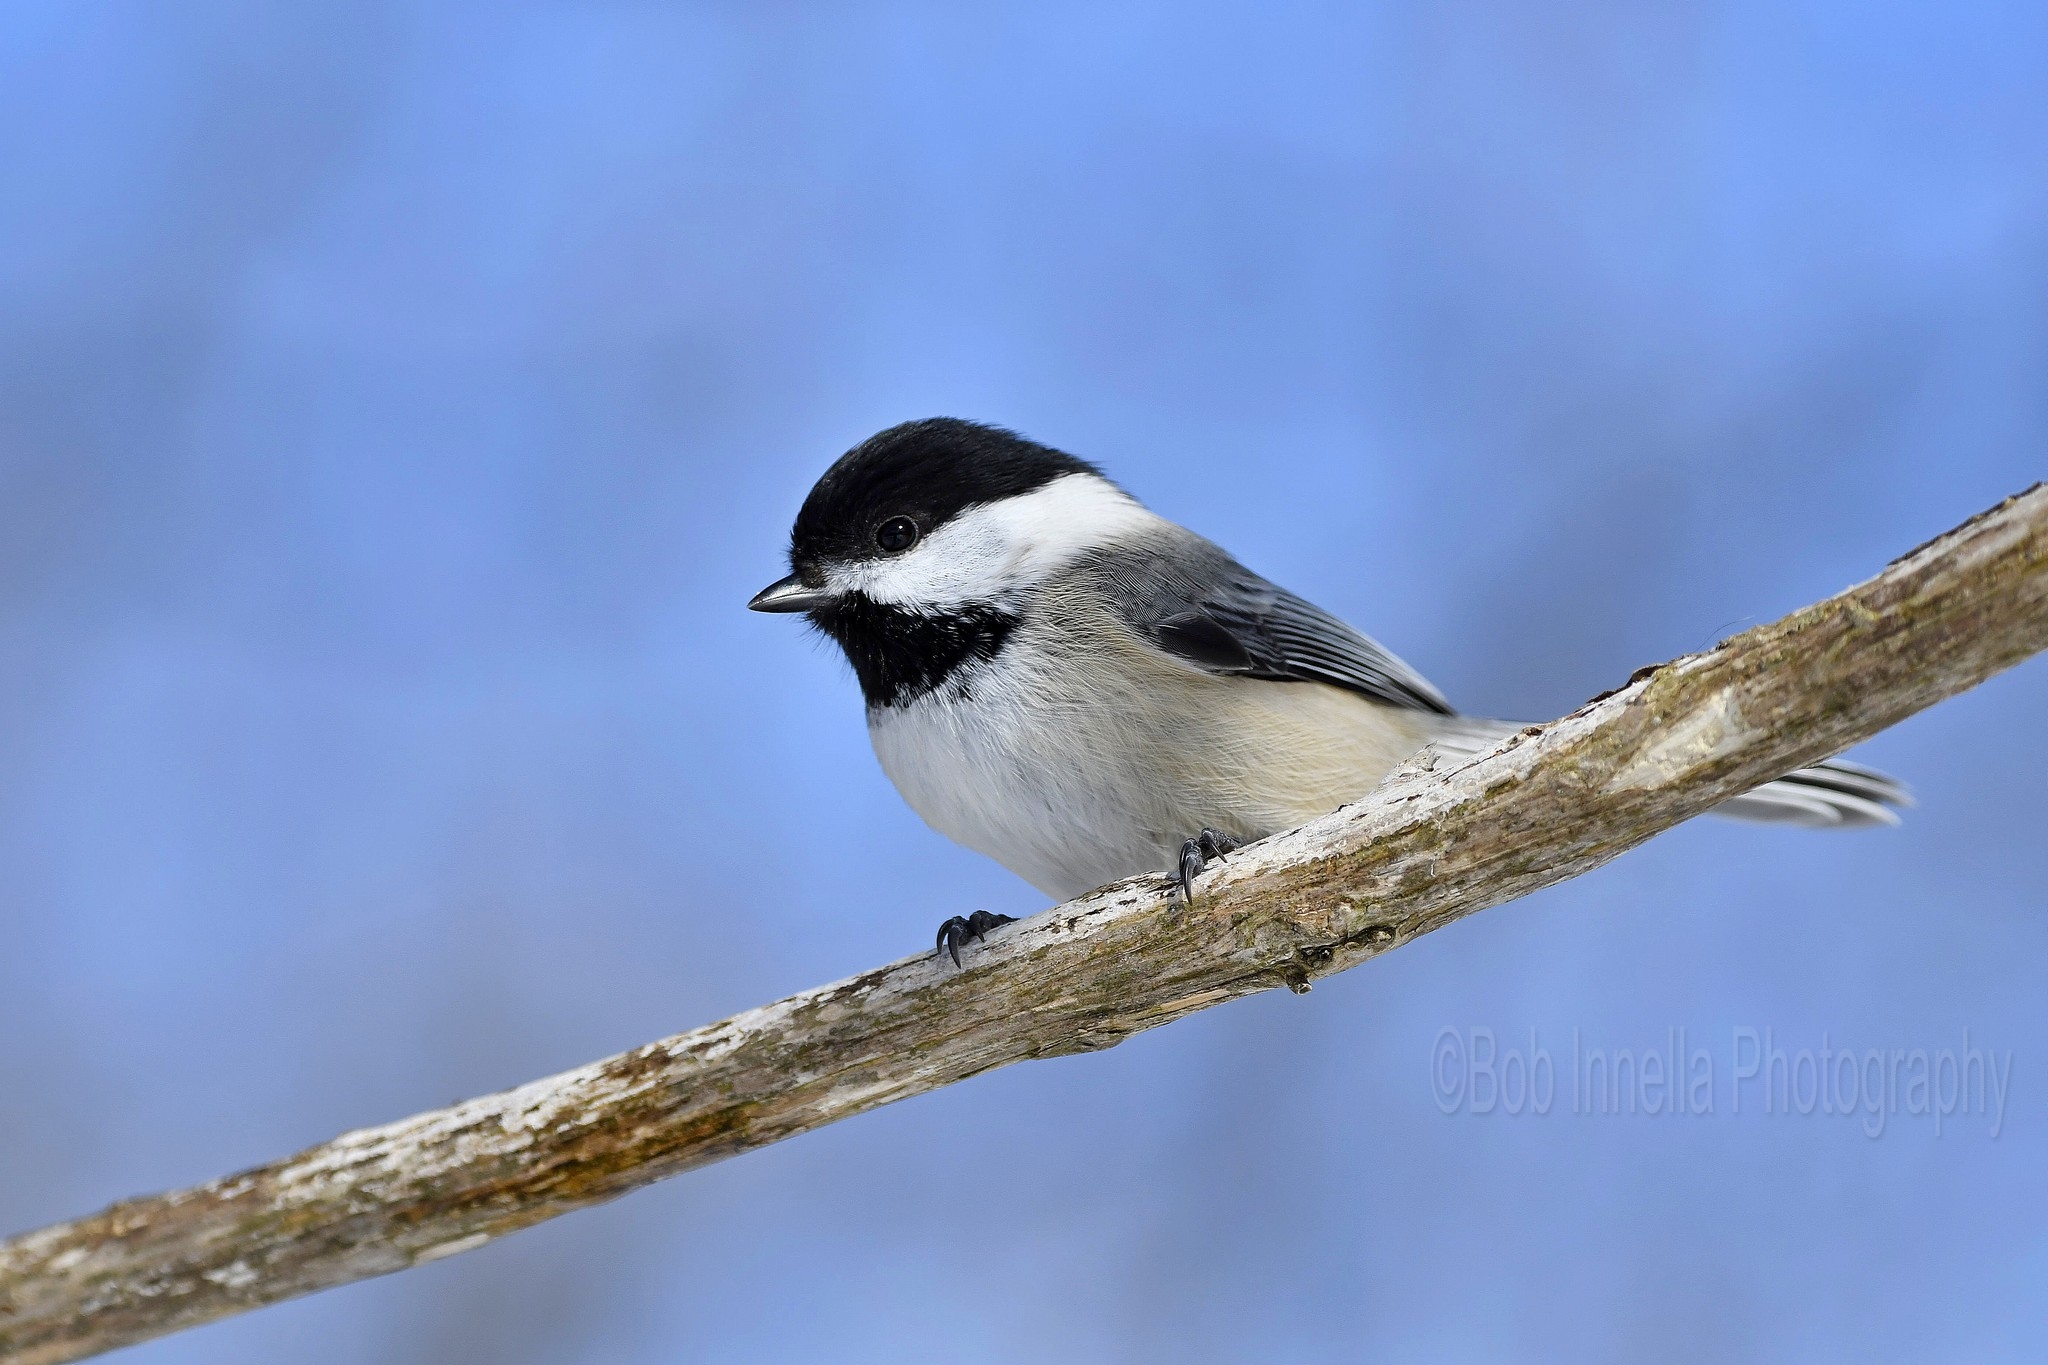 Black Capped Chickadee2 Taken in the Wilds of Northeast Pa by Buckmaster